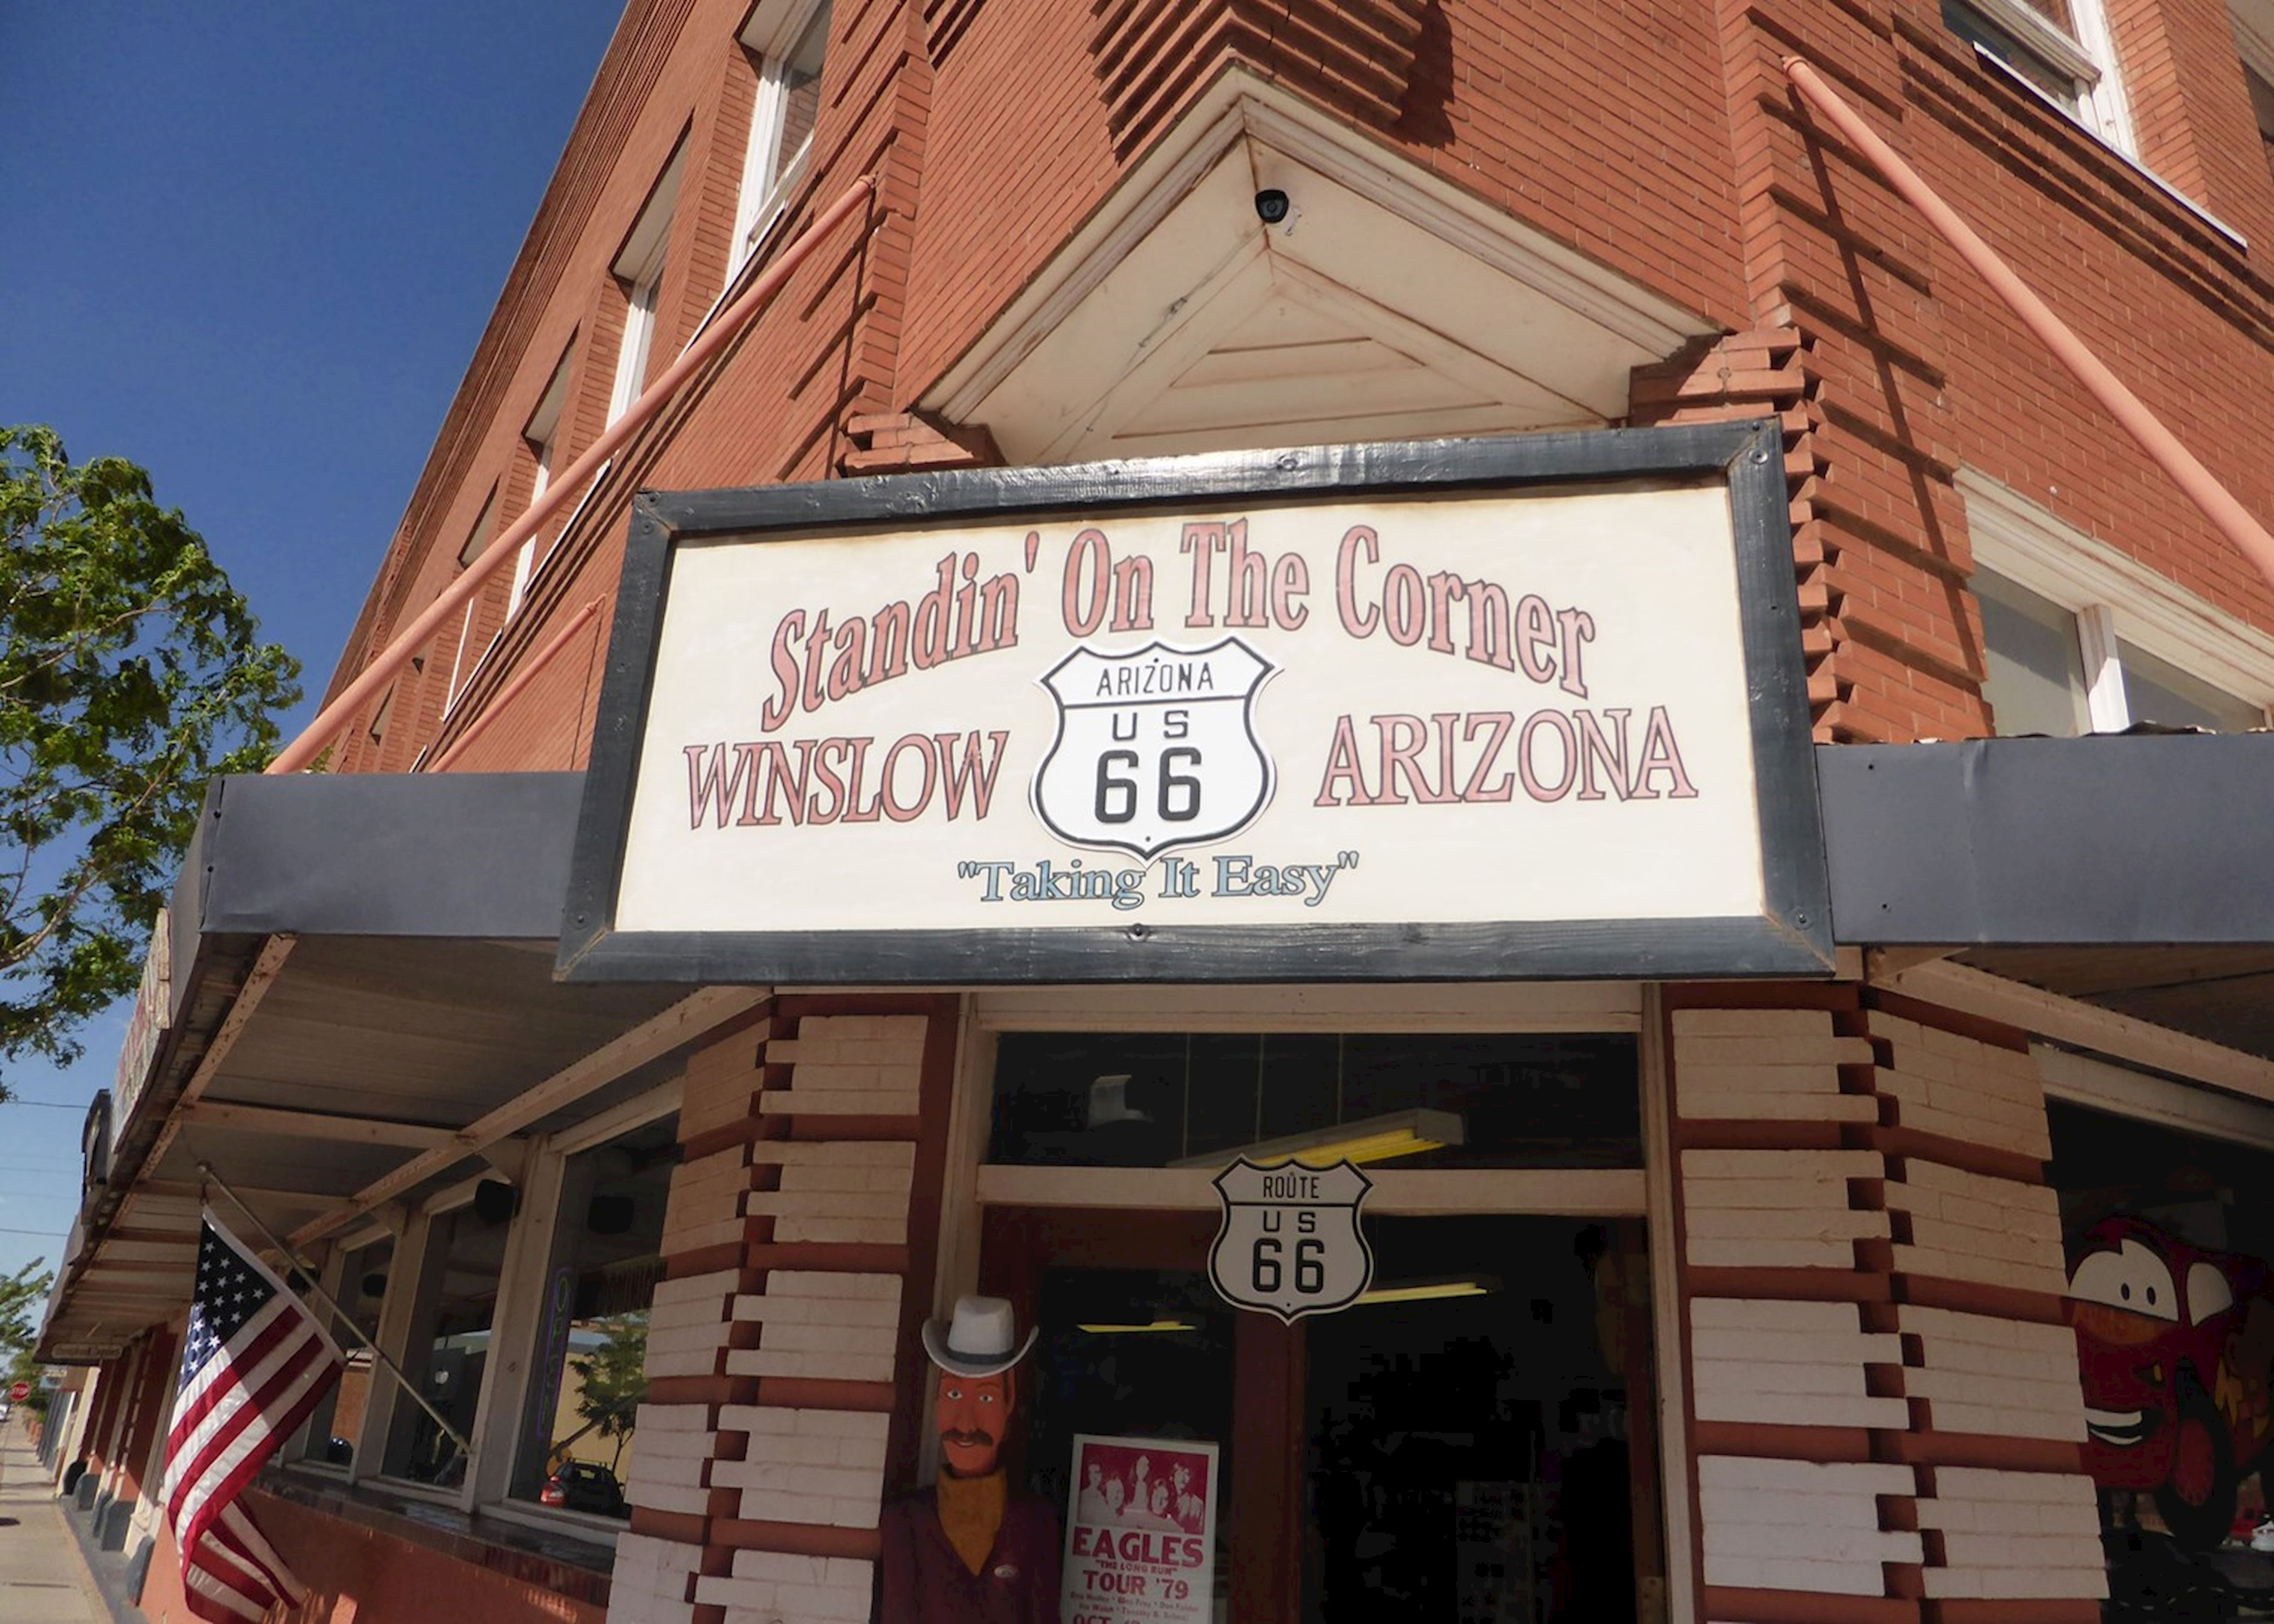 Visit Winslow on a trip to The USA | Audley Travel UK